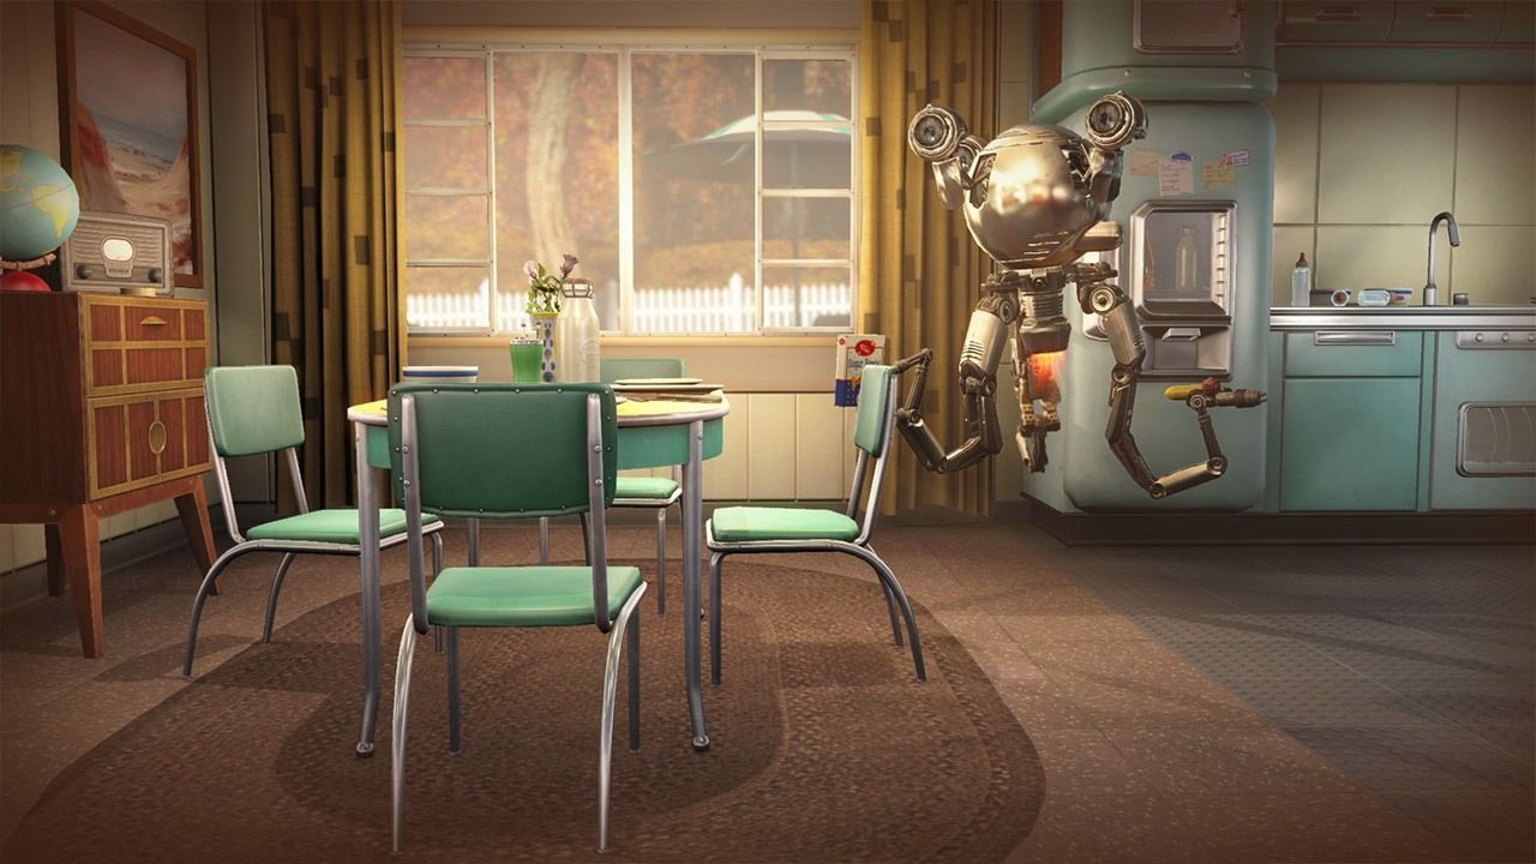 What are your first impressions of Fallout 4?